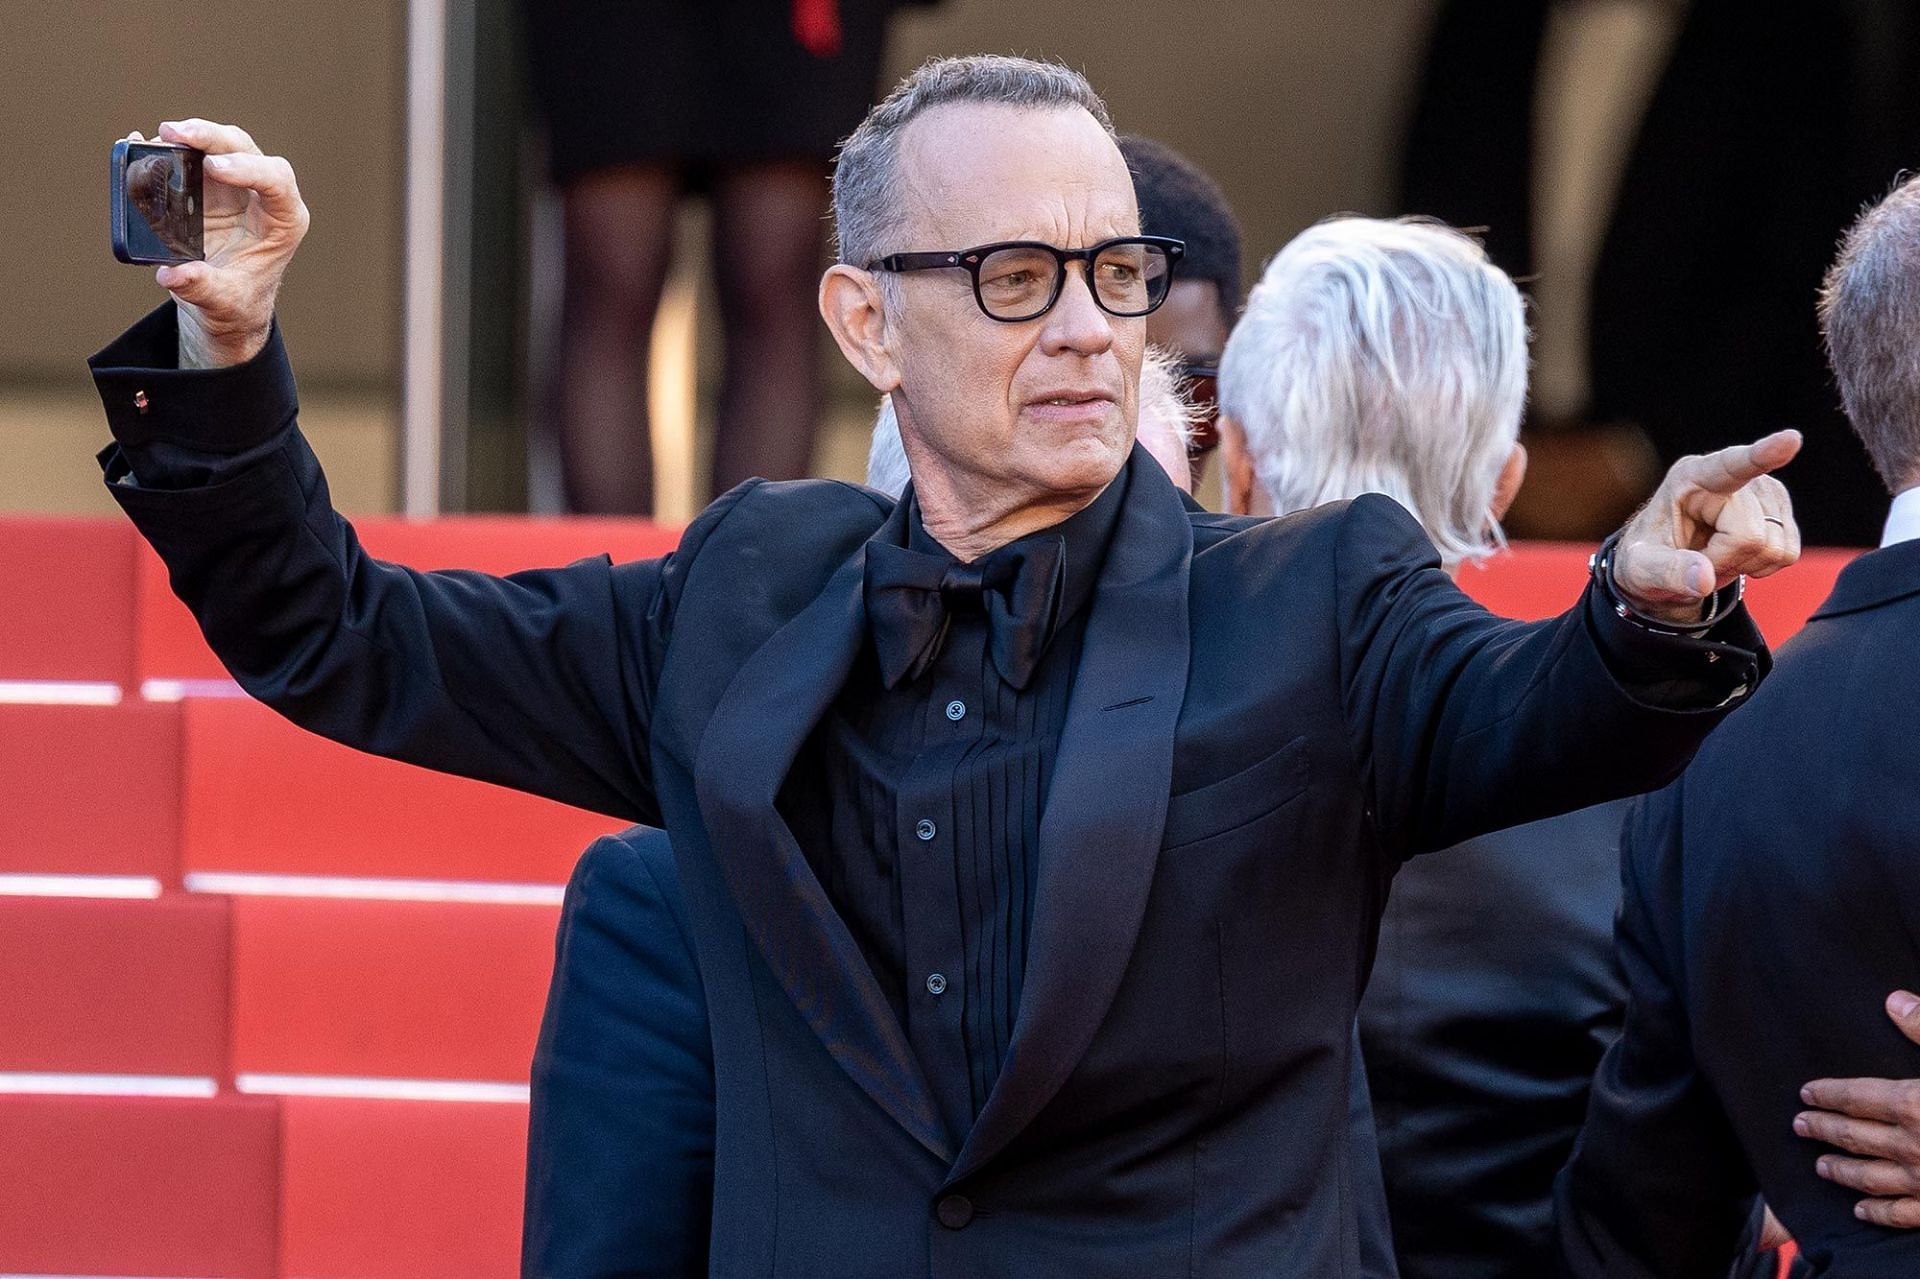 Tom Hanks surprises fans with dramatic weight loss at Cannes Film